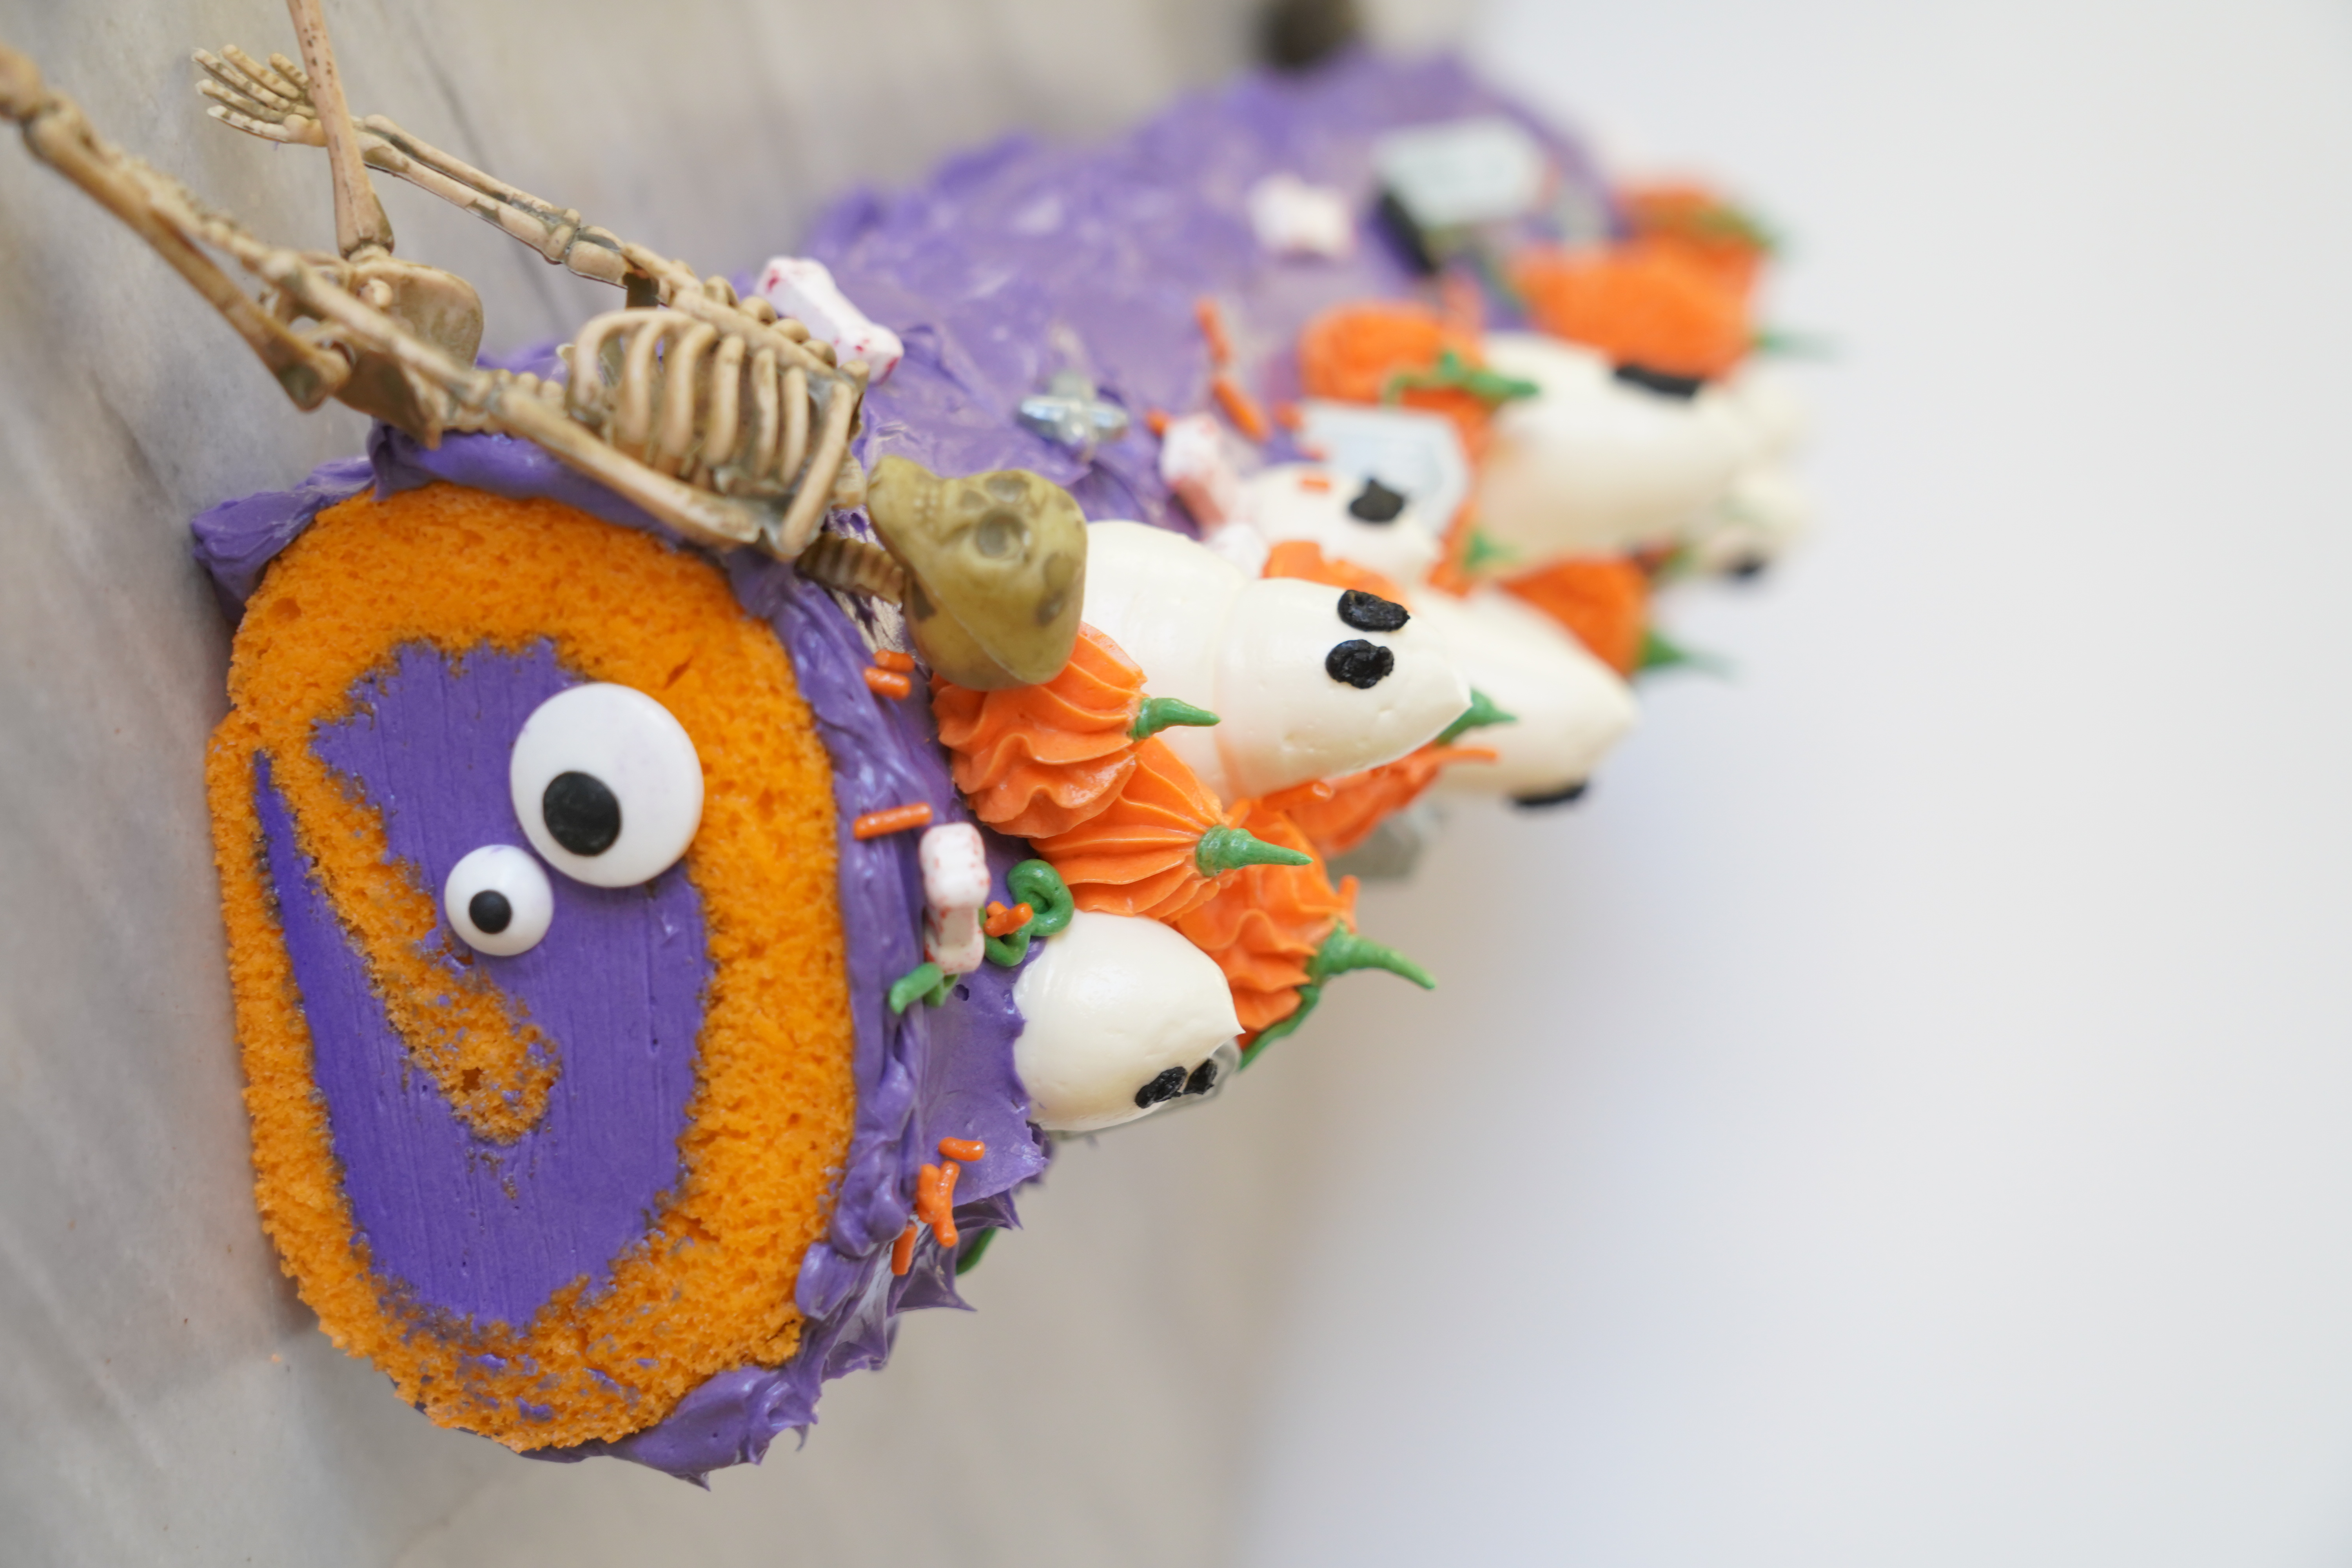 An orange and purple cake decorated with Halloween sprinkles on a white plate